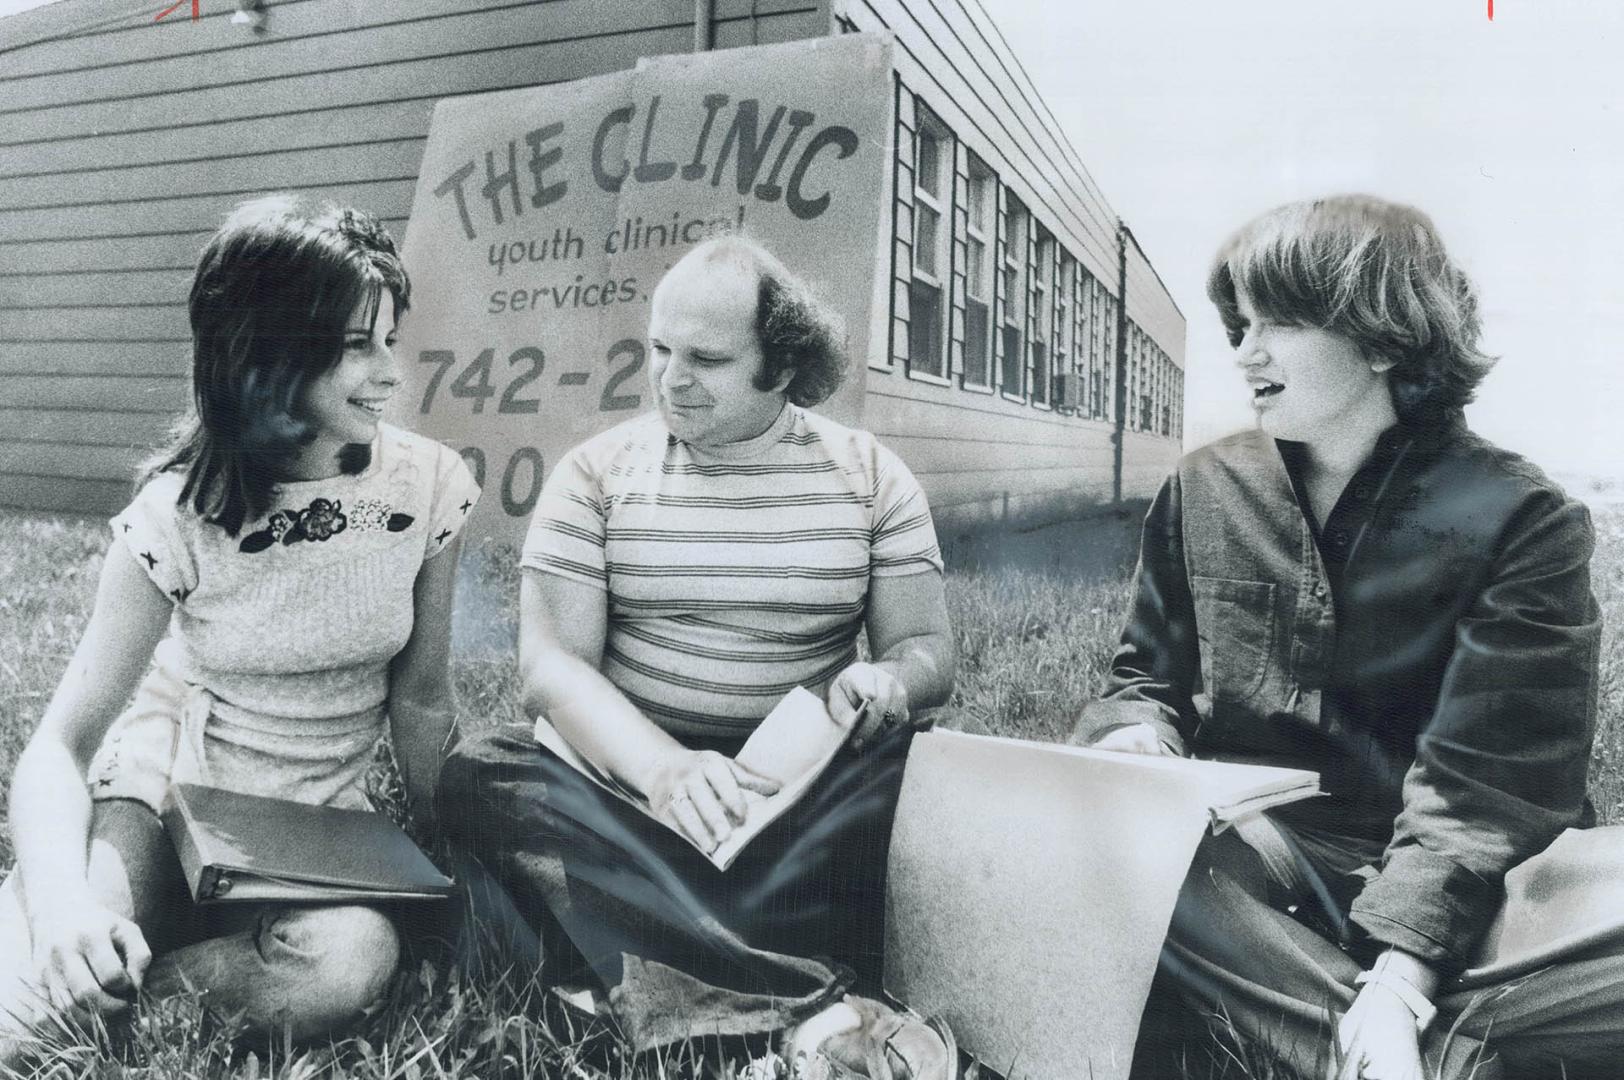 Comparing Notes on the day's problems outside the Clinic are intake worker Heather Sant (left), and counsellors Clark Heaton and Janice May. It has op(...)